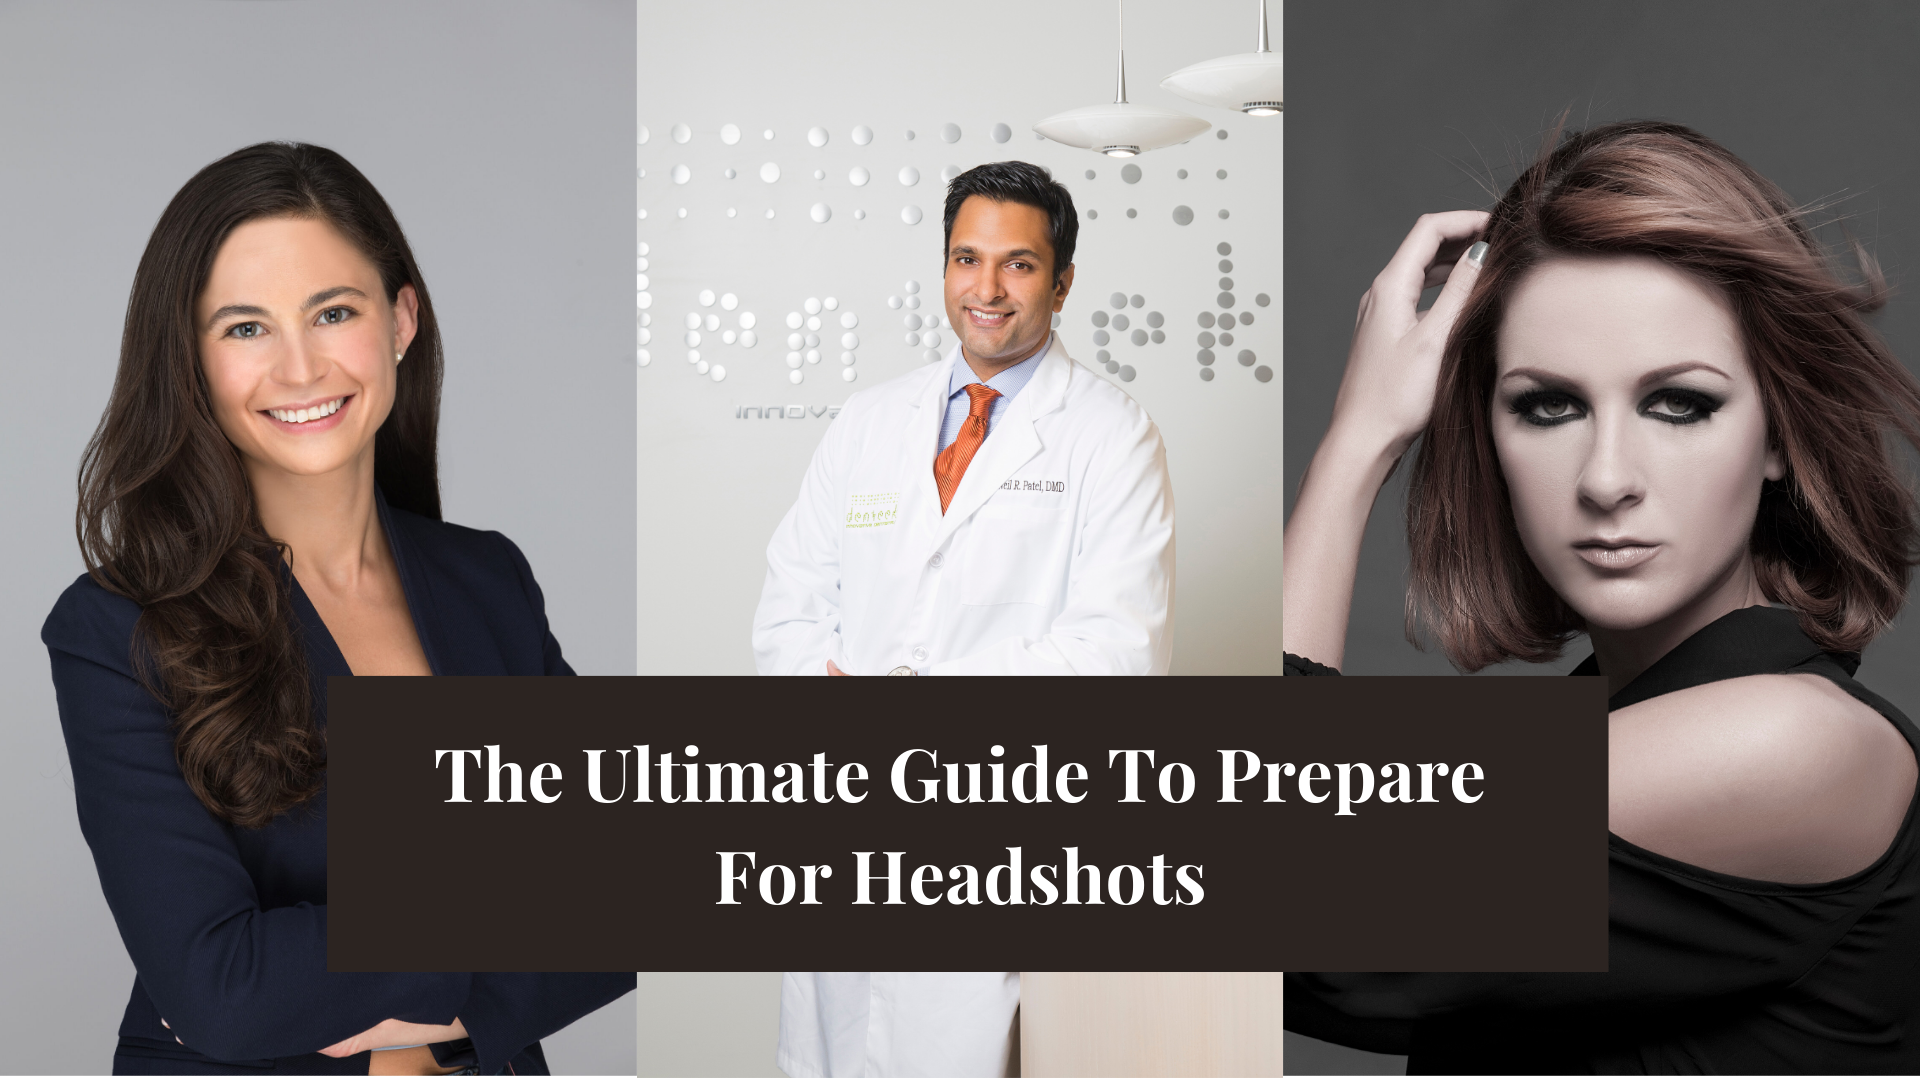 The Ultimate Guide to prepare for headshot